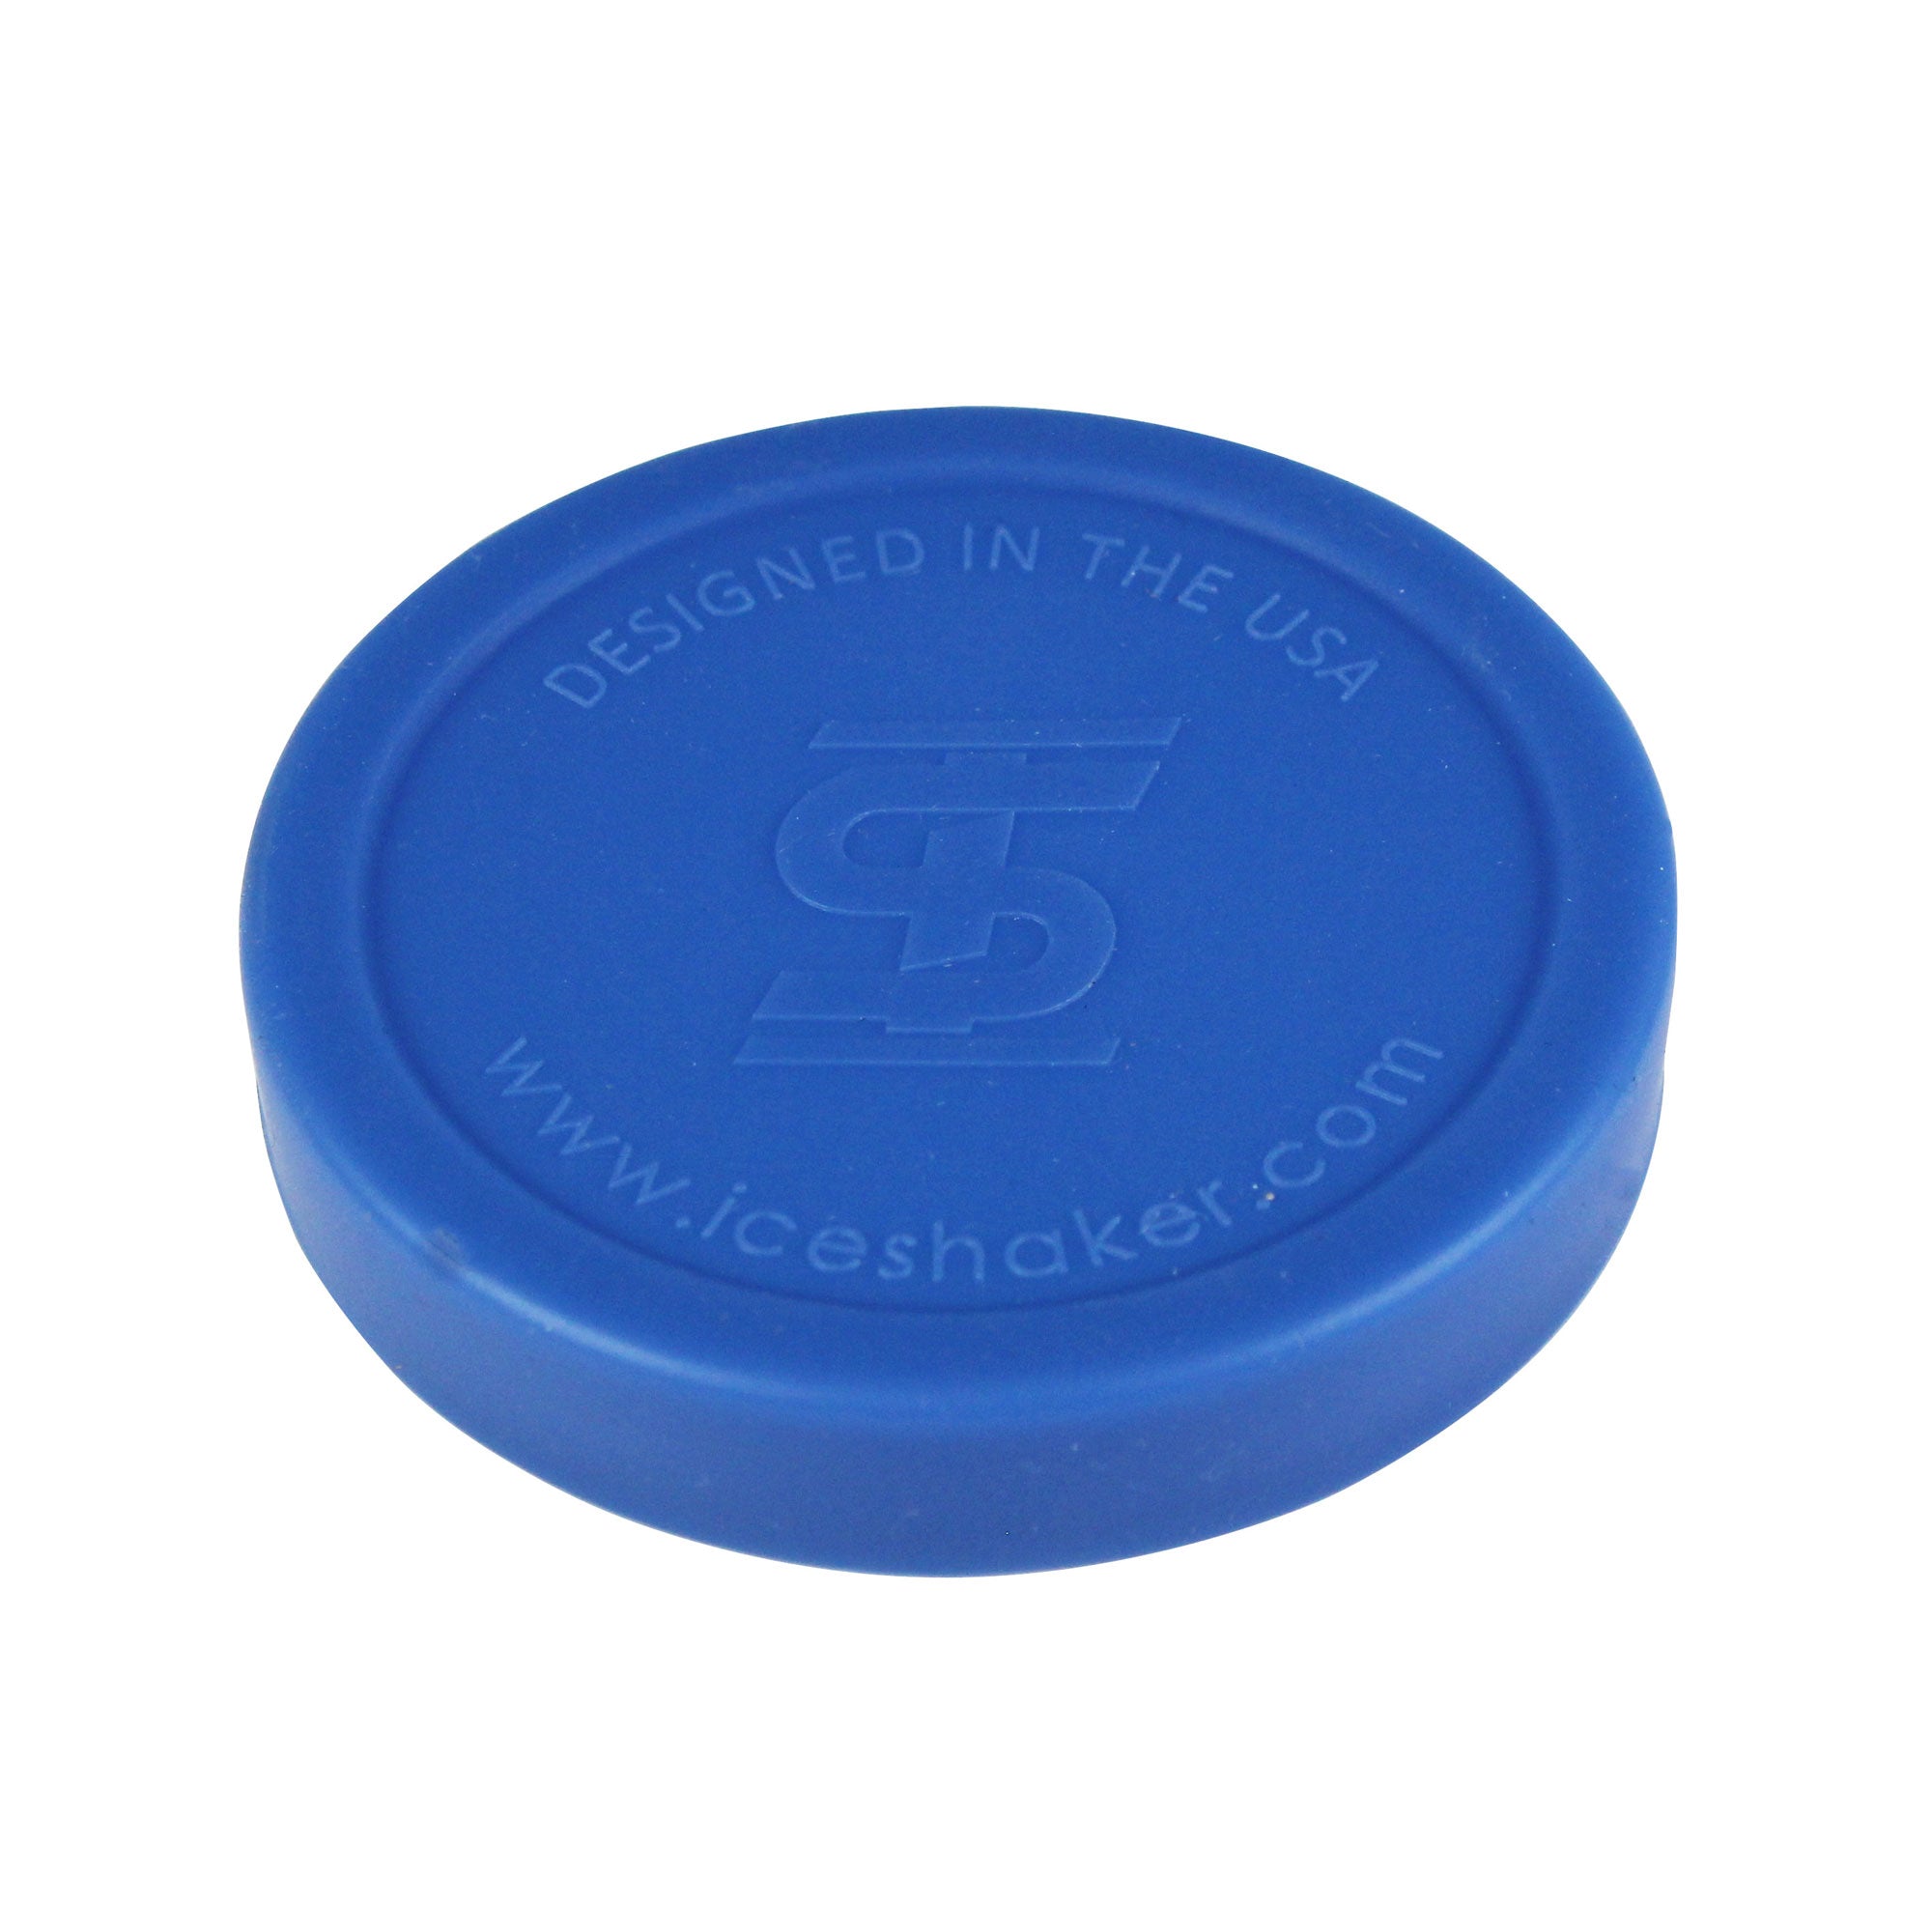 36oz. Ice Shaker Bottle Replacement Lids